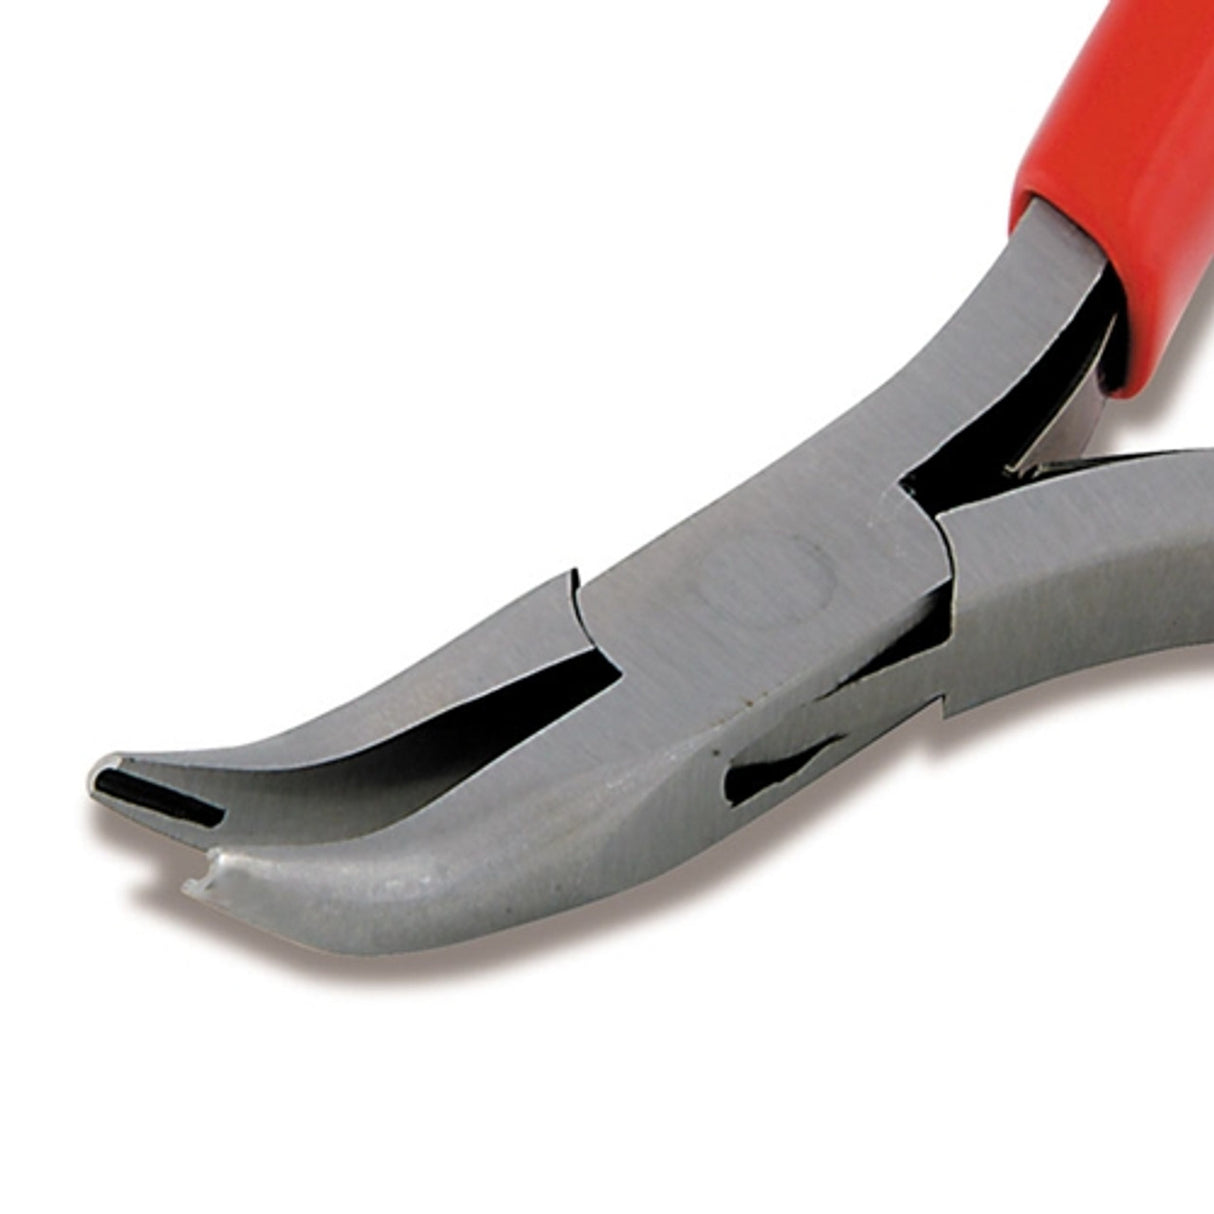 Prong Closing Pliers